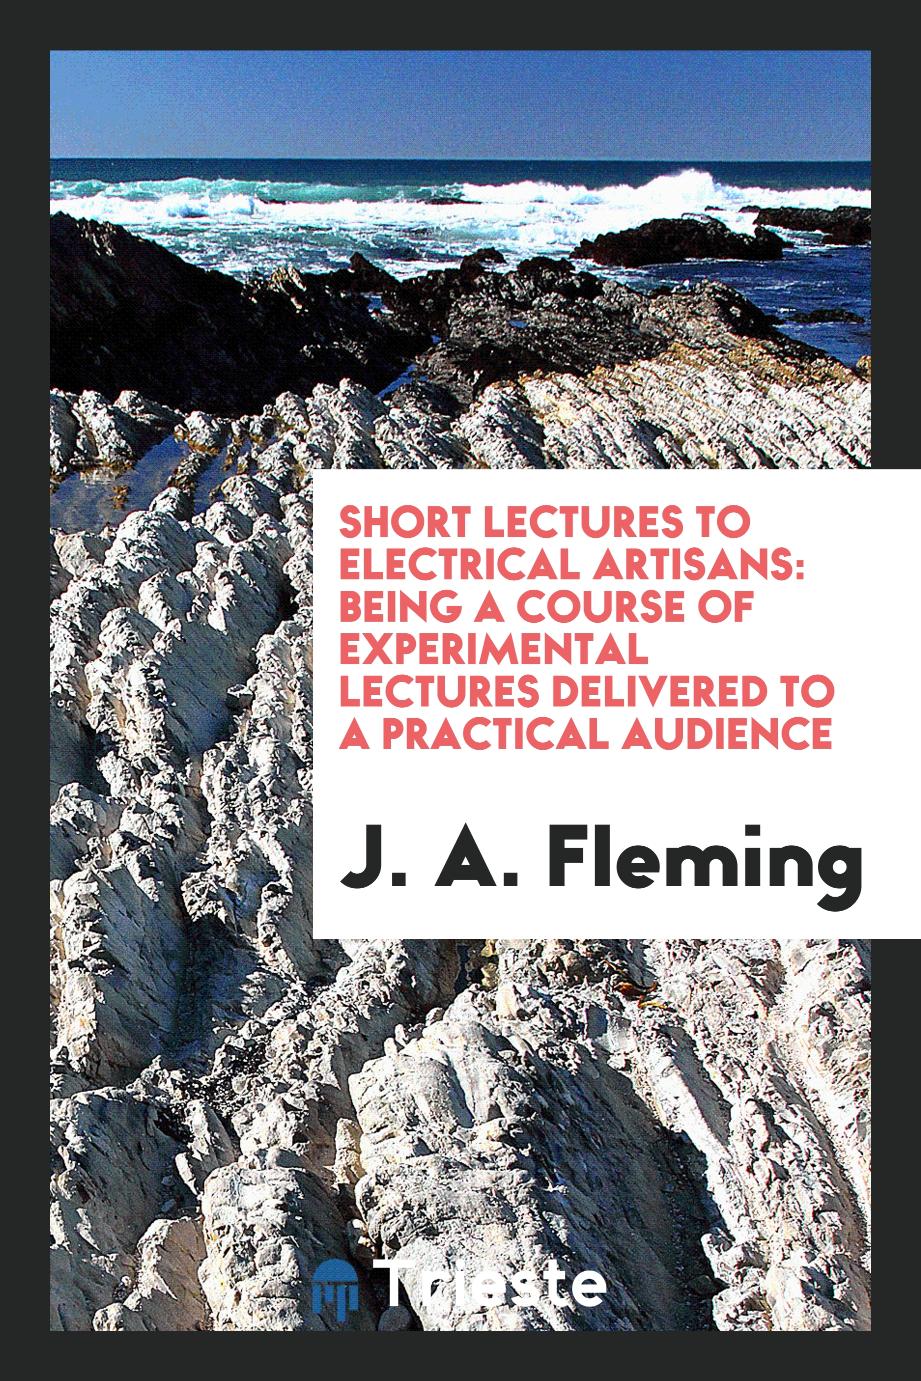 Short Lectures to Electrical Artisans: Being a Course of Experimental Lectures Delivered to a Practical Audience